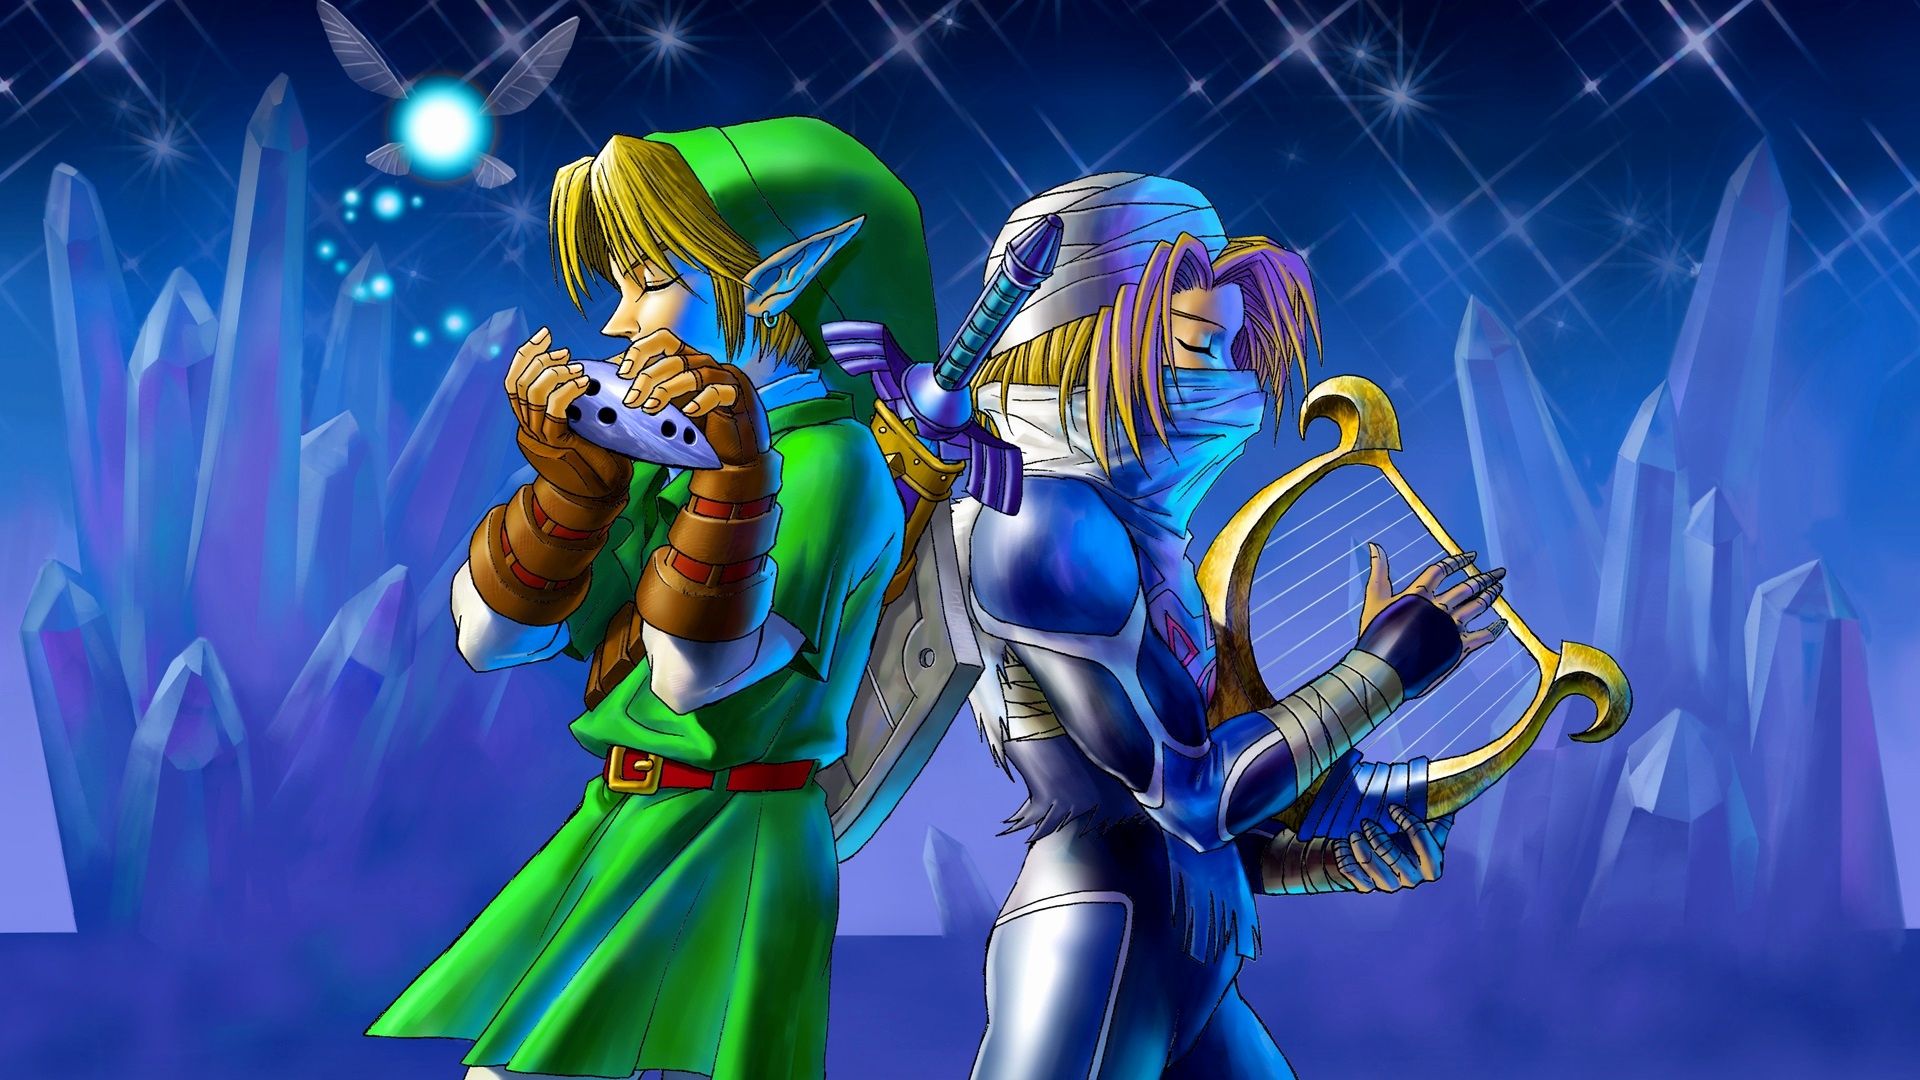 Ocarina Of Time Wallpaper Awesome the Legend Zelda Ocarina Time Wallpaper This Year of The Hudson